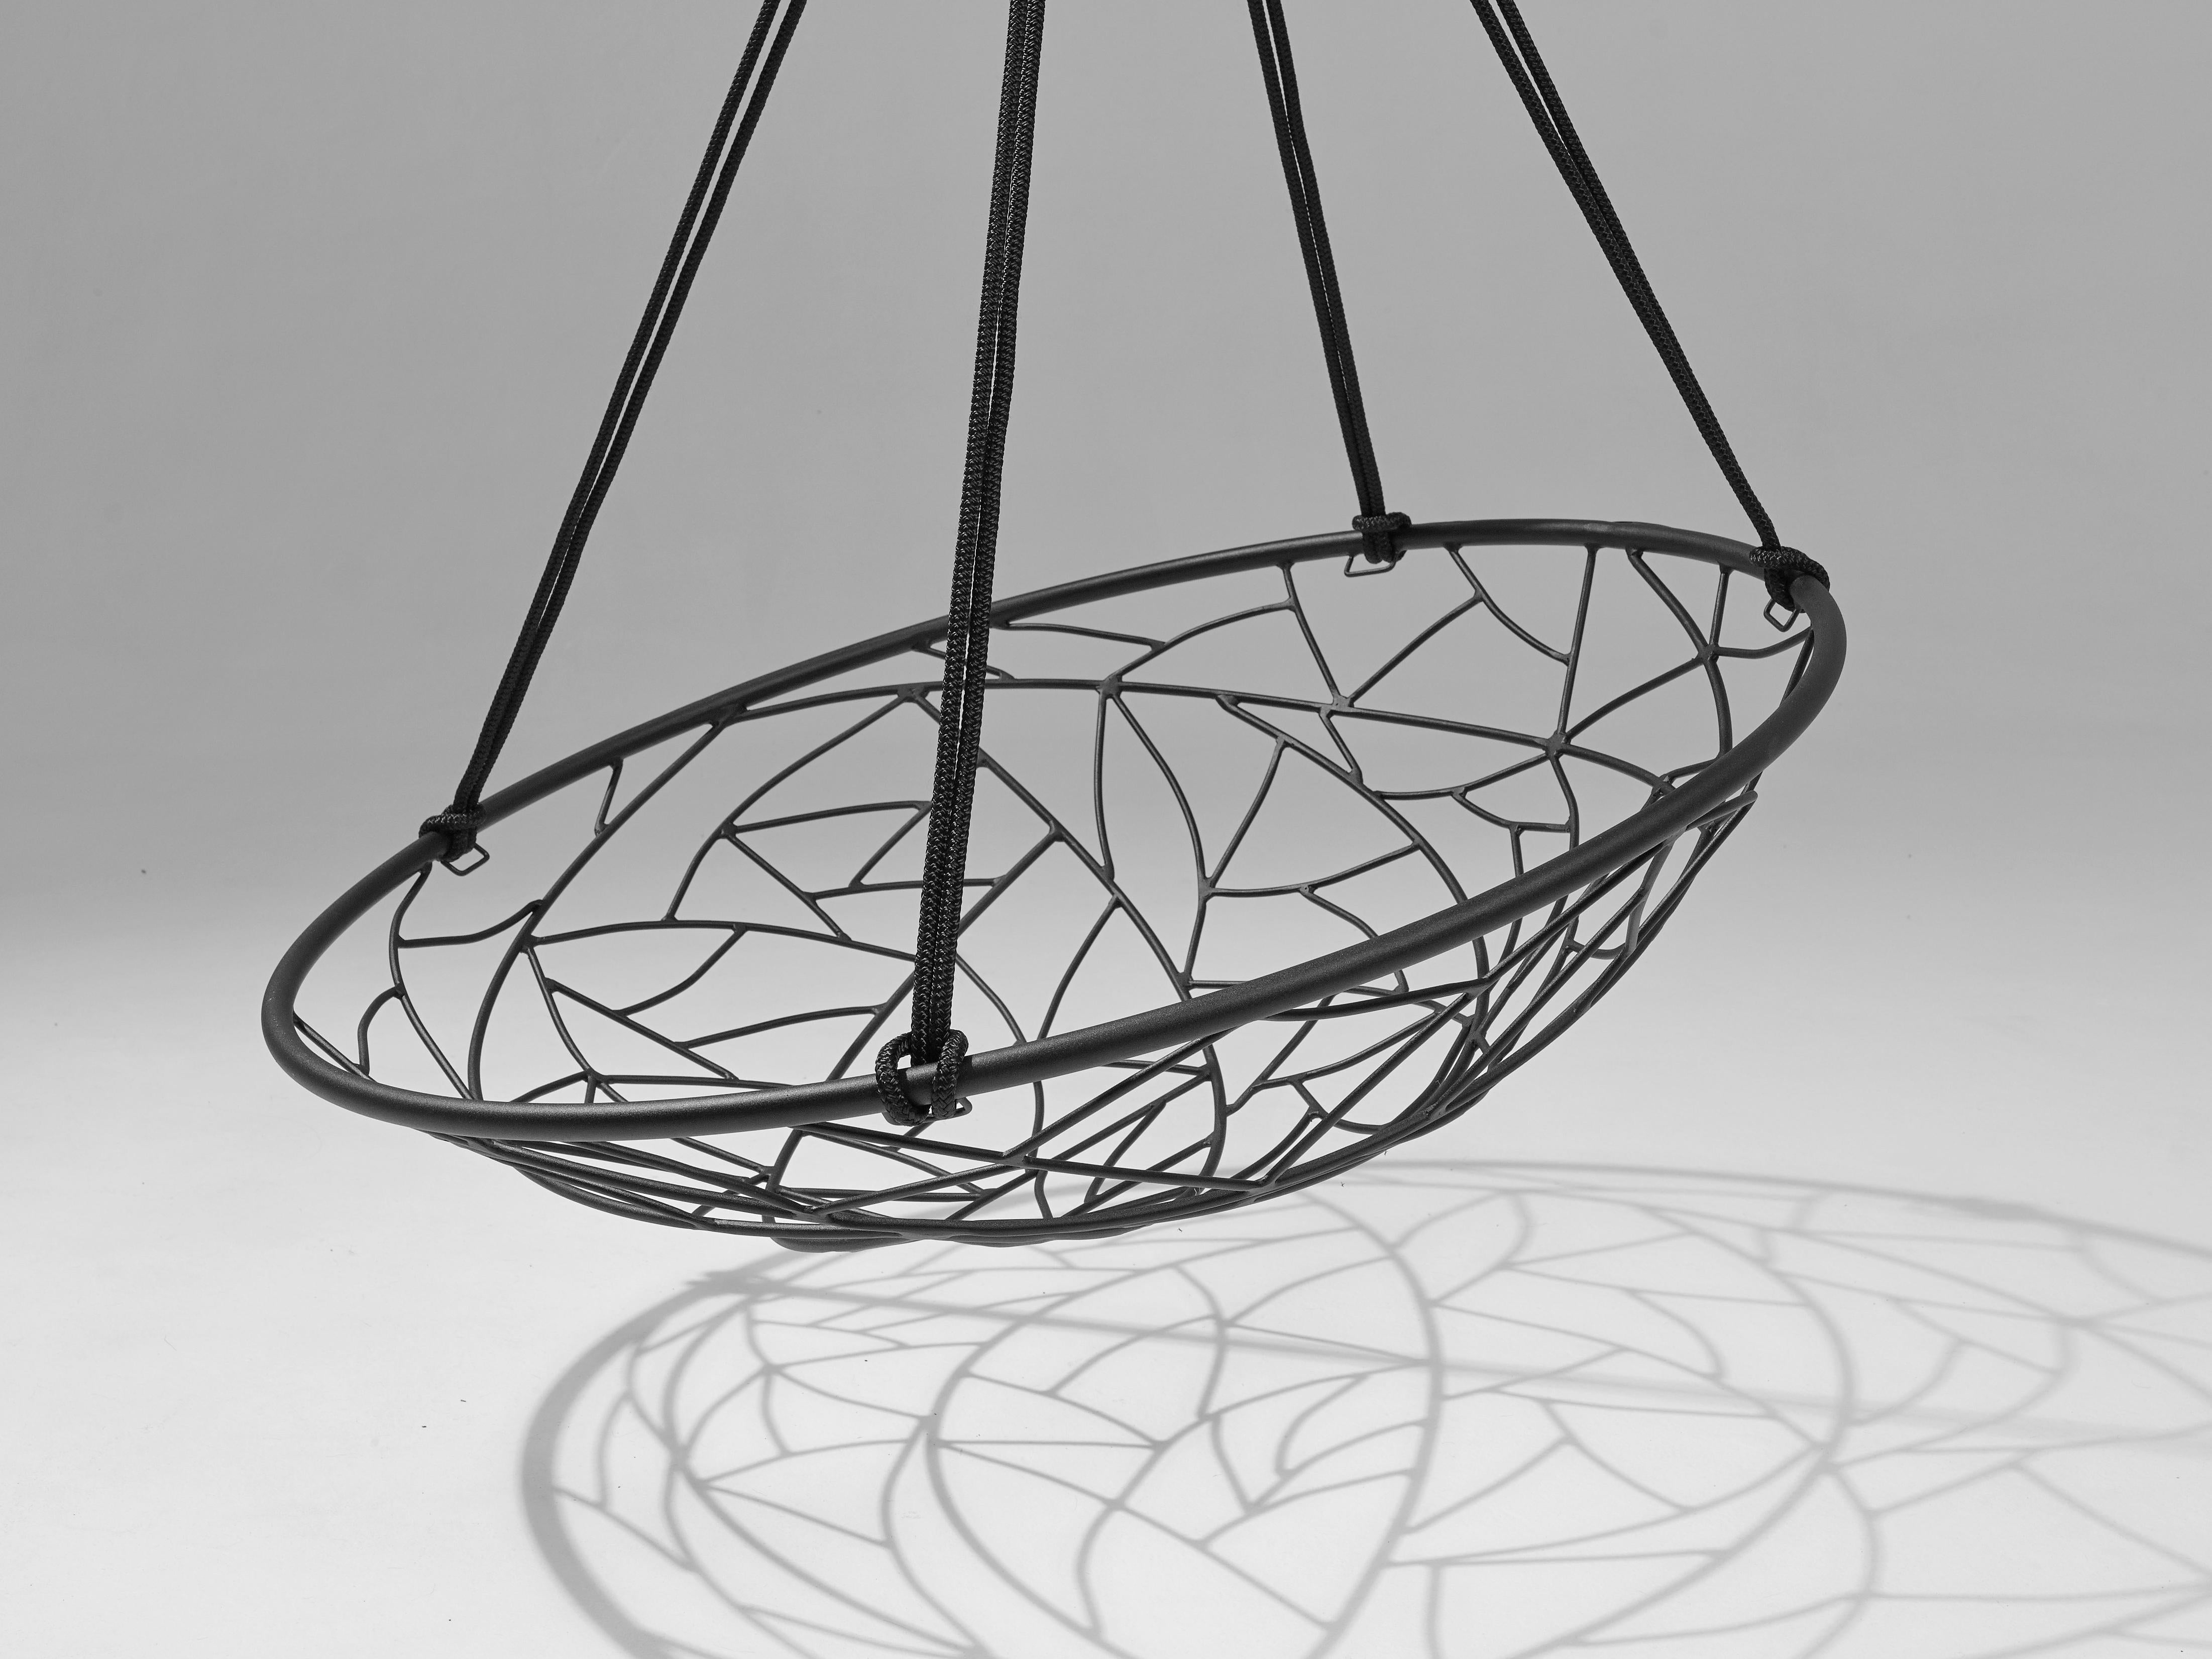 The Basket hanging chair swing seat's round shape creates a cozy feel. It is simple and striking in its visual appeal. 

The twig pattern detail is reminiscent of tree branches that intersect, grasses that are intertwined, the veins in dragonfly